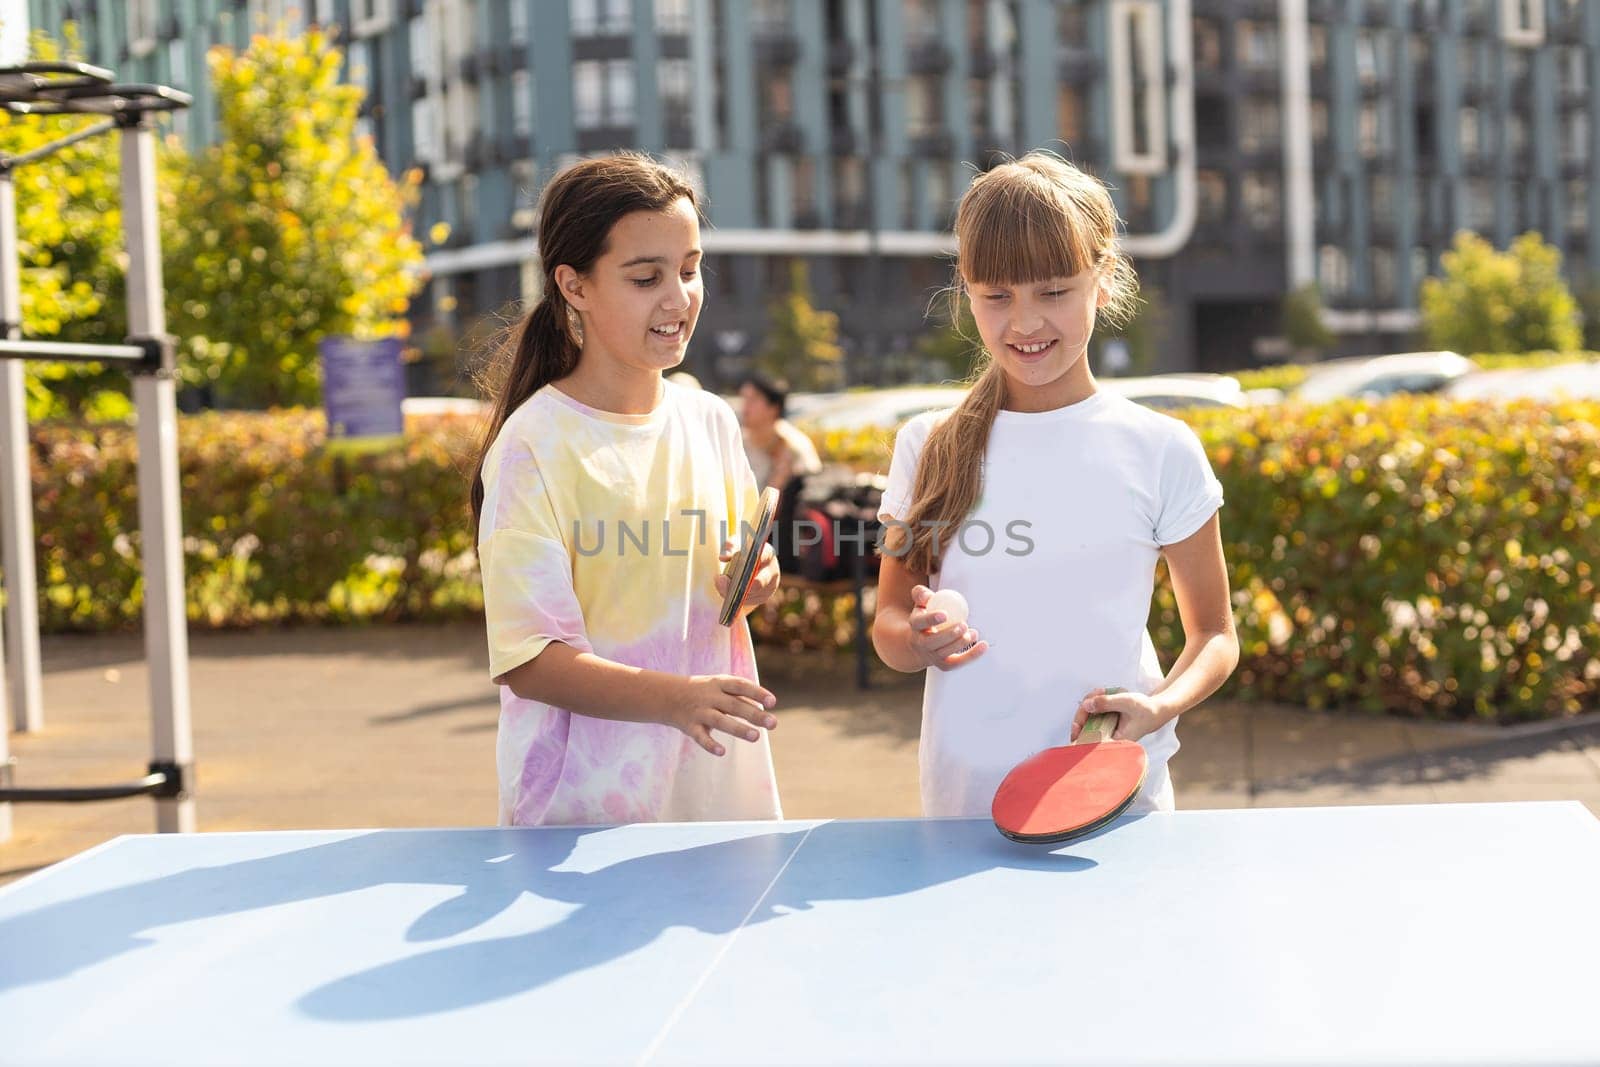 Young teenager girl playing ping pong. She holds a ball and a racket in her hands. Playing table tennis outdoors in the yard. High quality photo